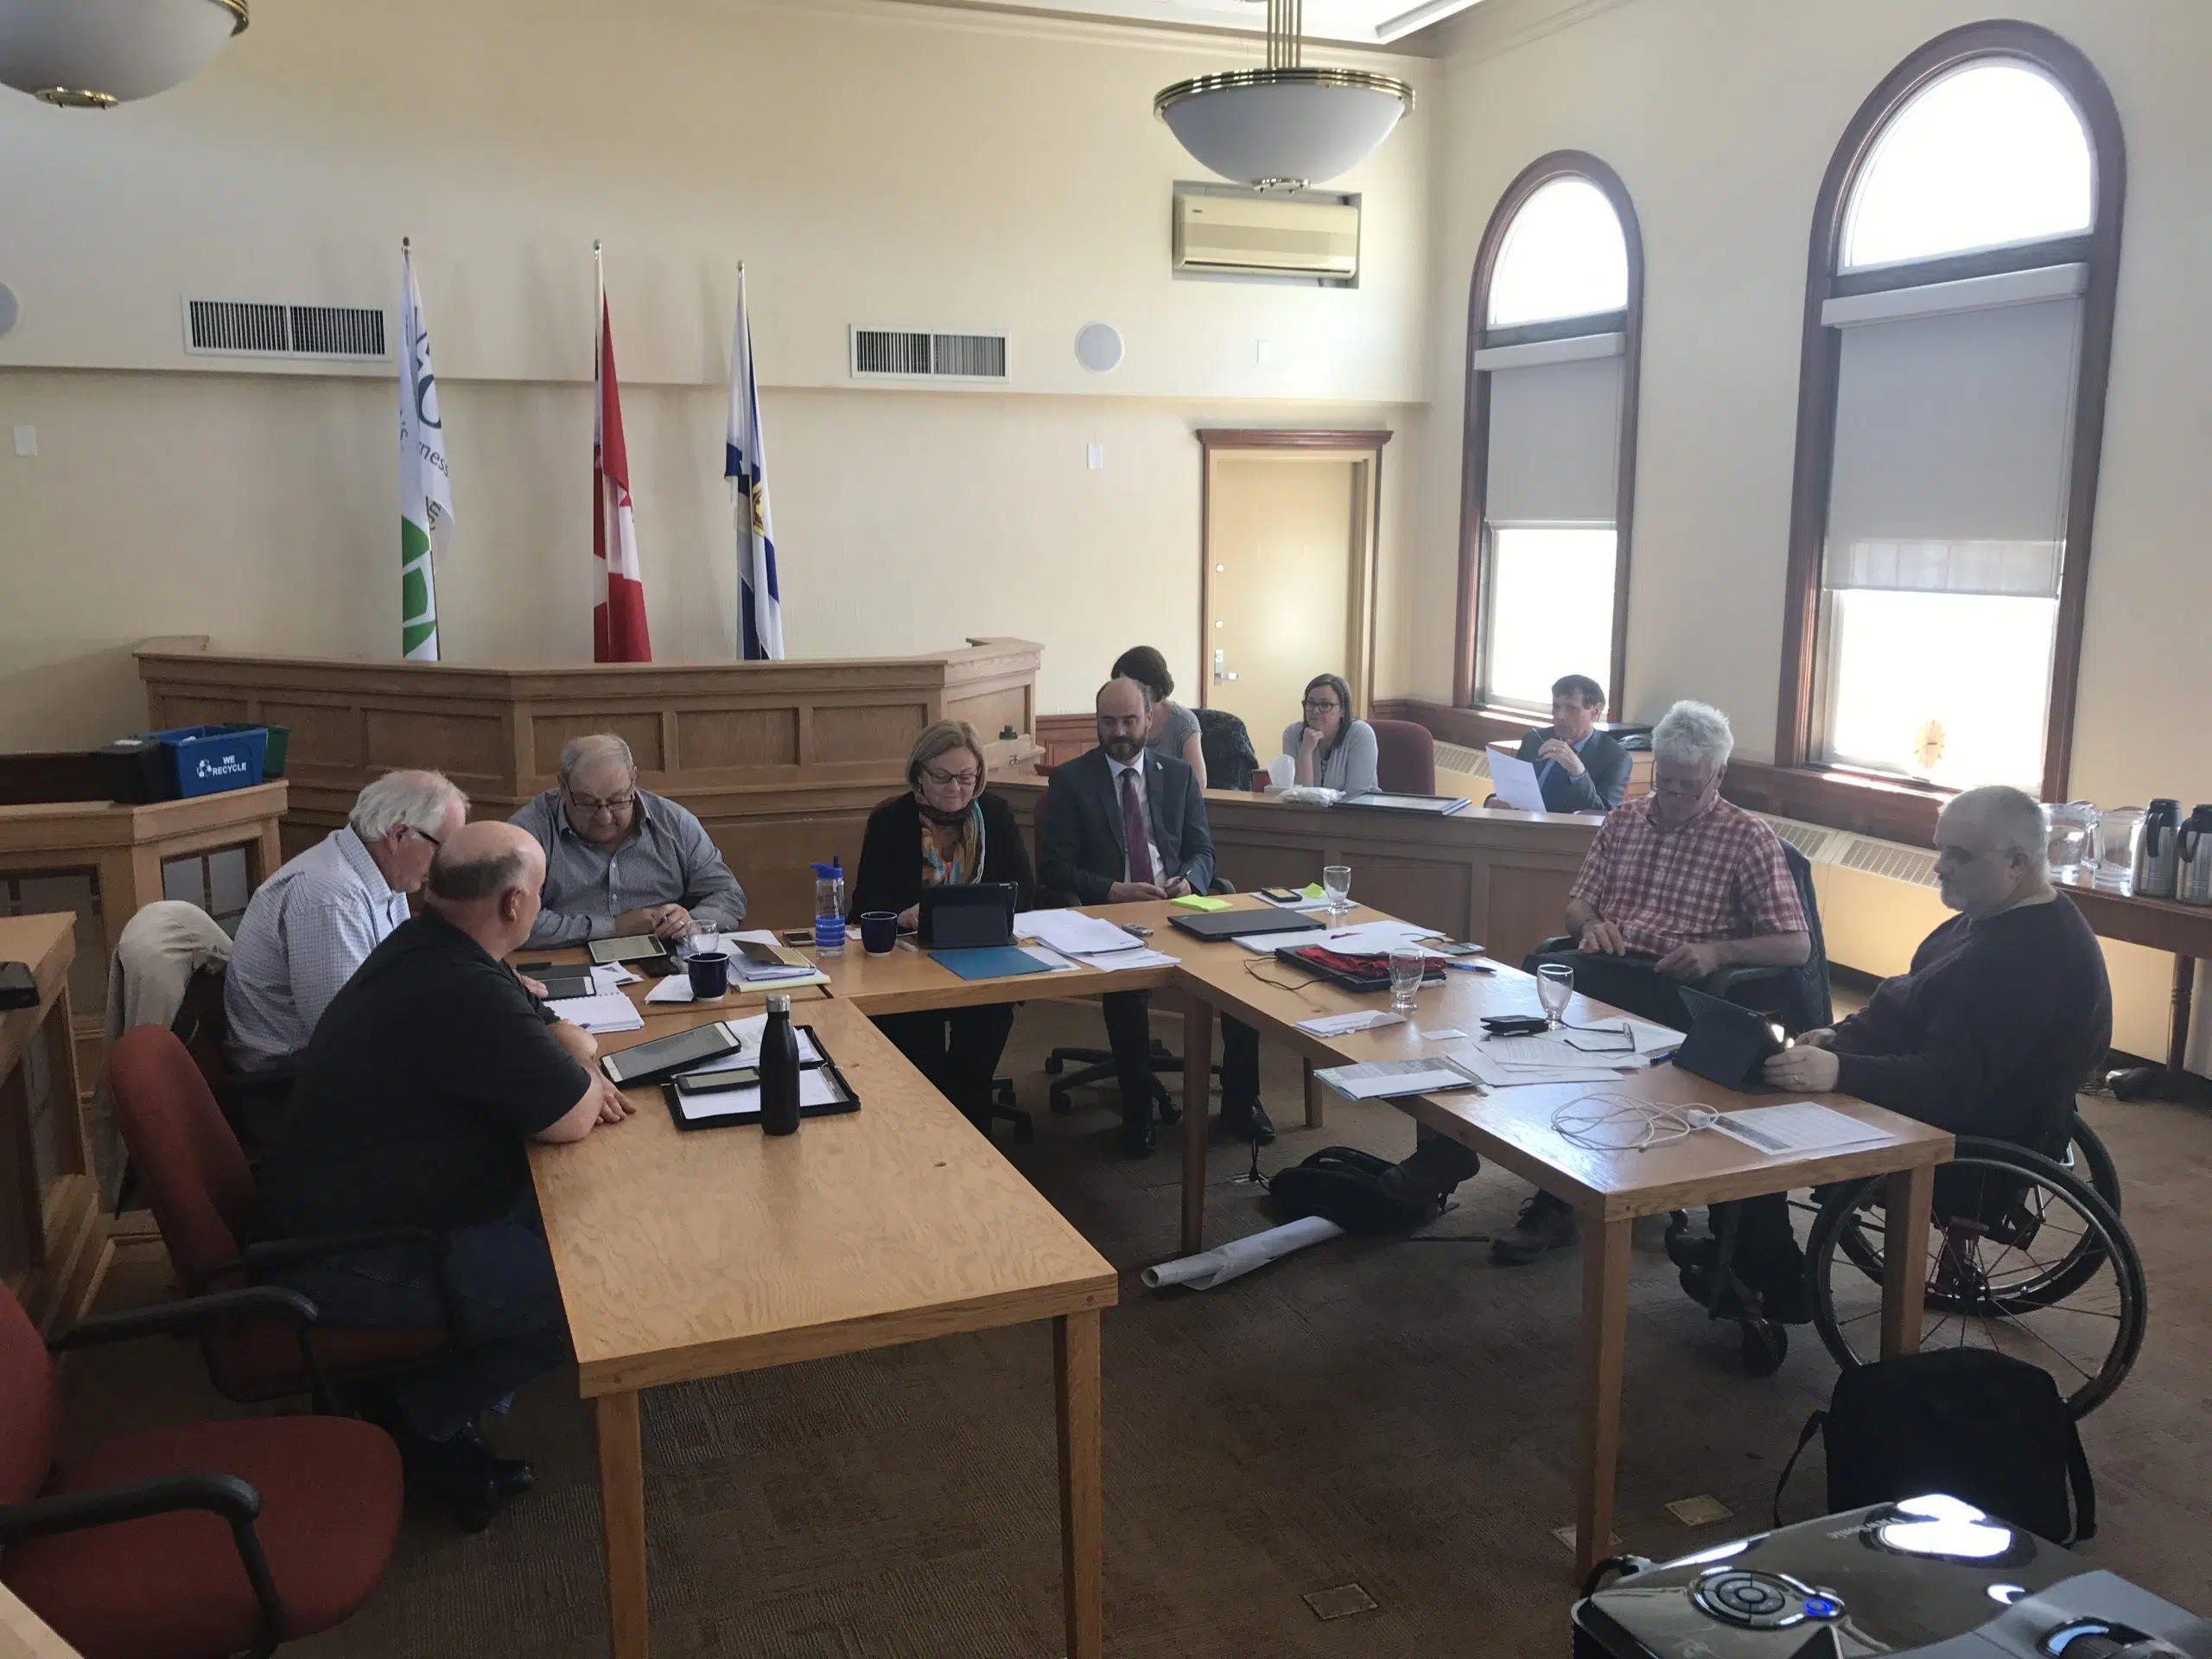 Warden says accessibility committee work well underway